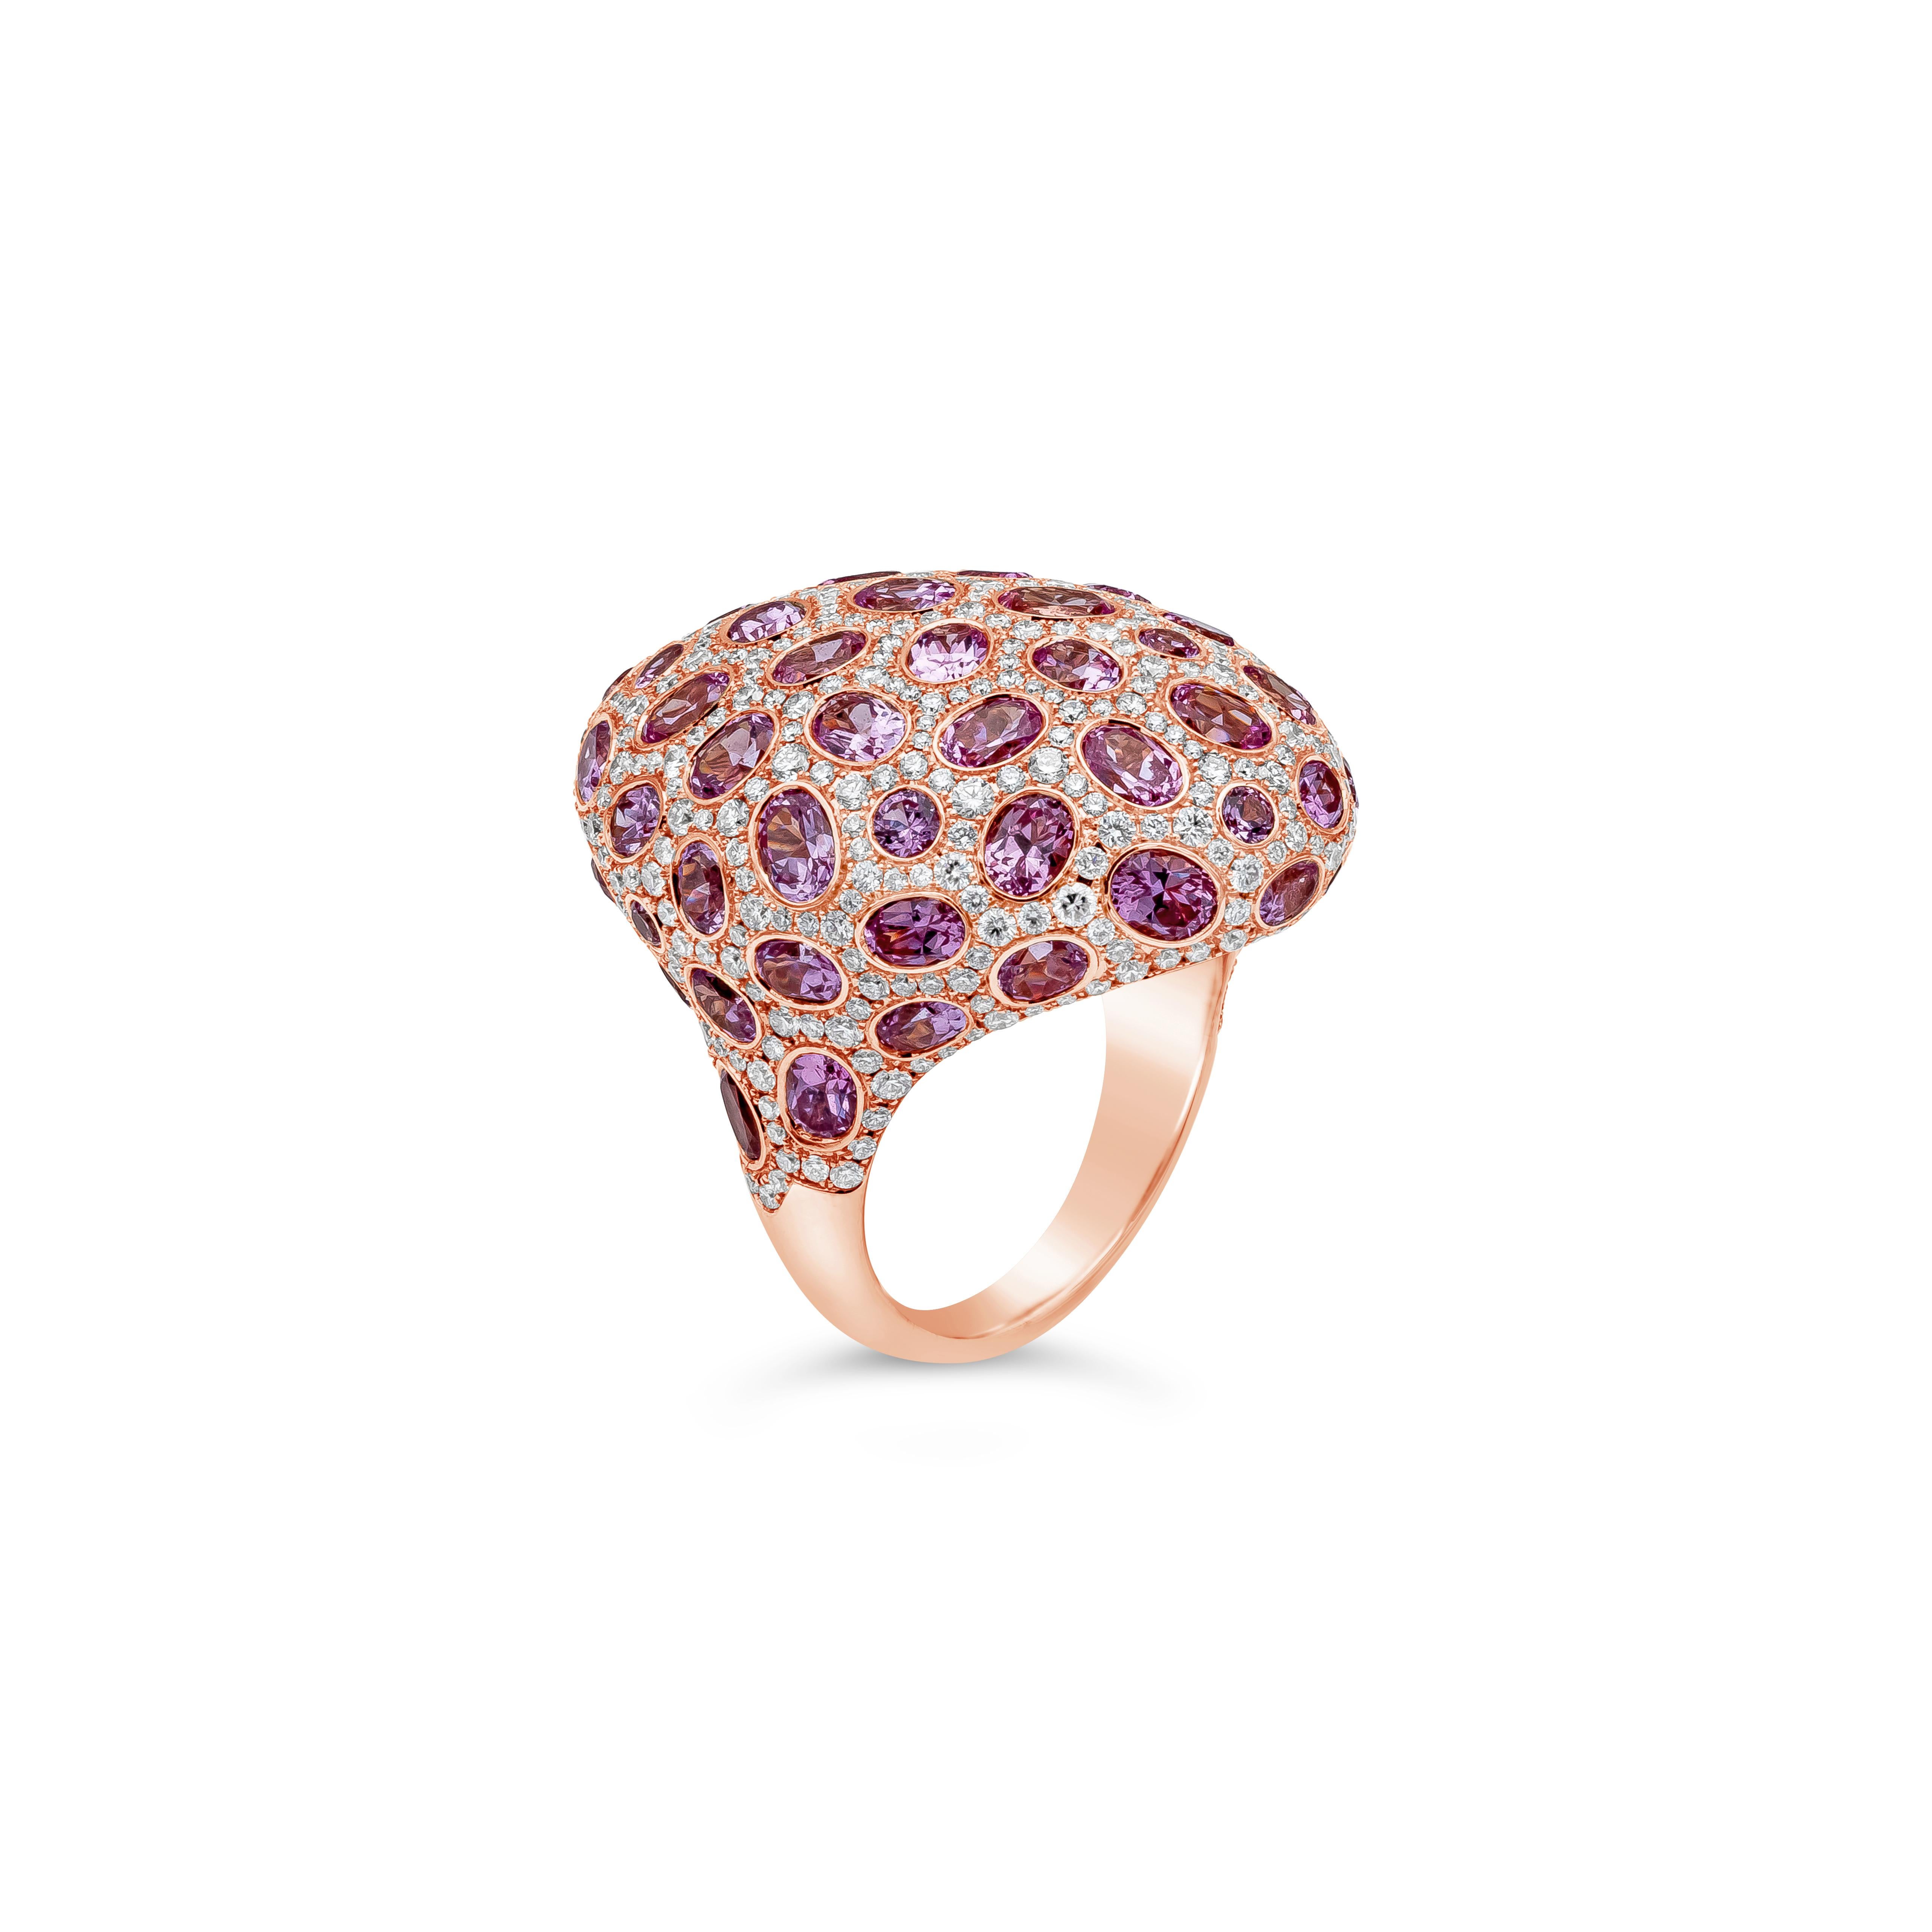 Contemporary Roman Malakov 9.91 Carat Oval Cut Pink Sapphires with Round Diamond Fashion Ring For Sale